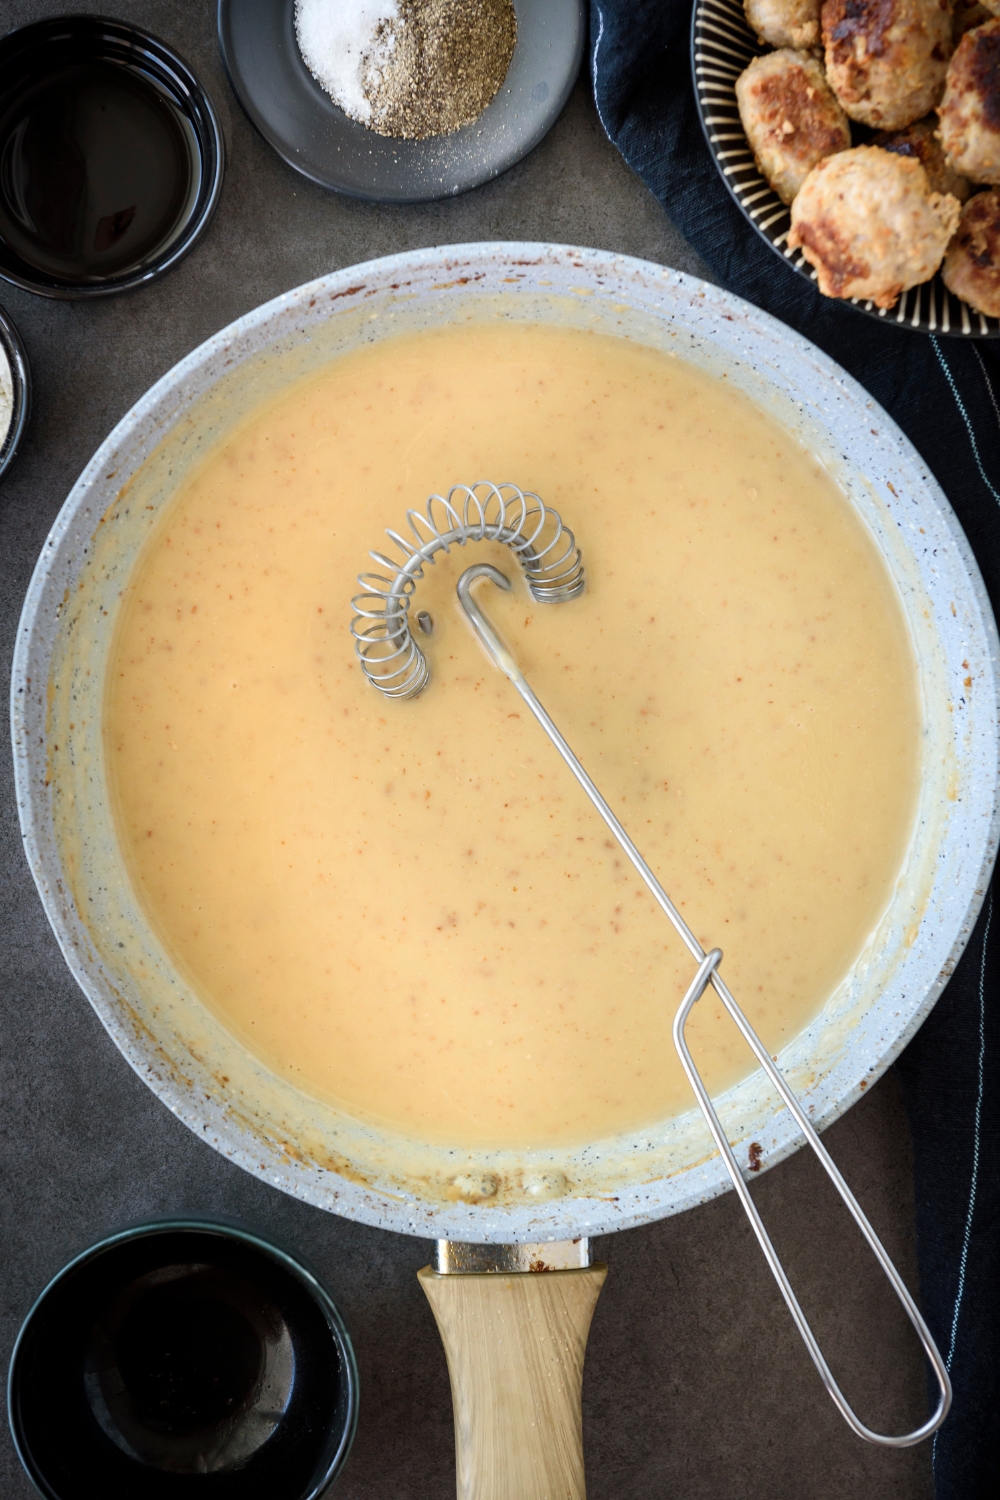 A skillet filled with a creamy sauce and a whisk is in the skillet.